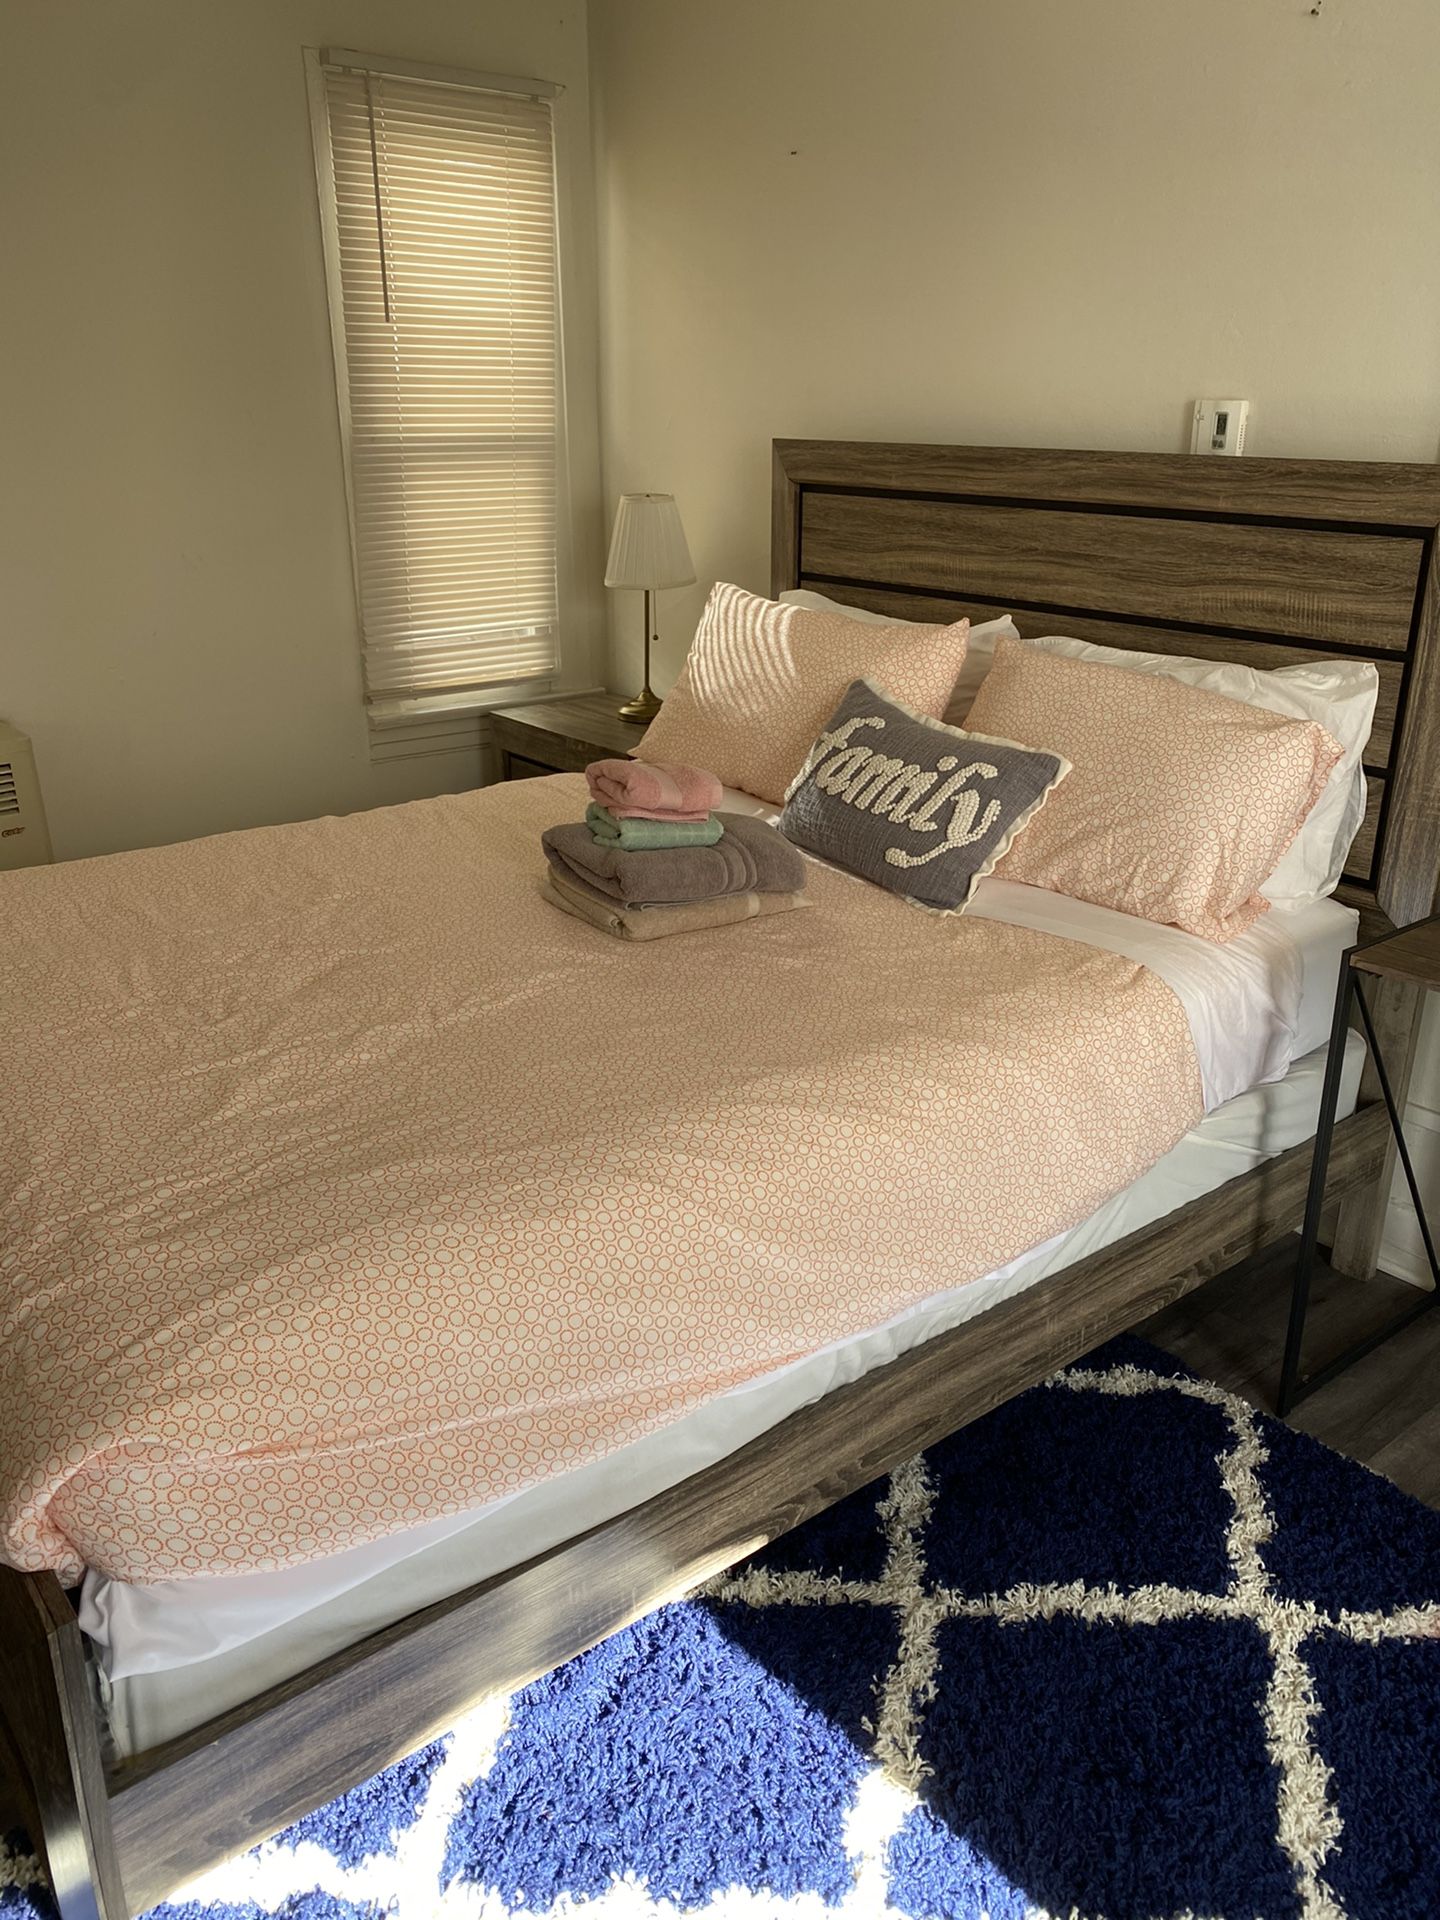 Queen Bed With Mattress And End Table